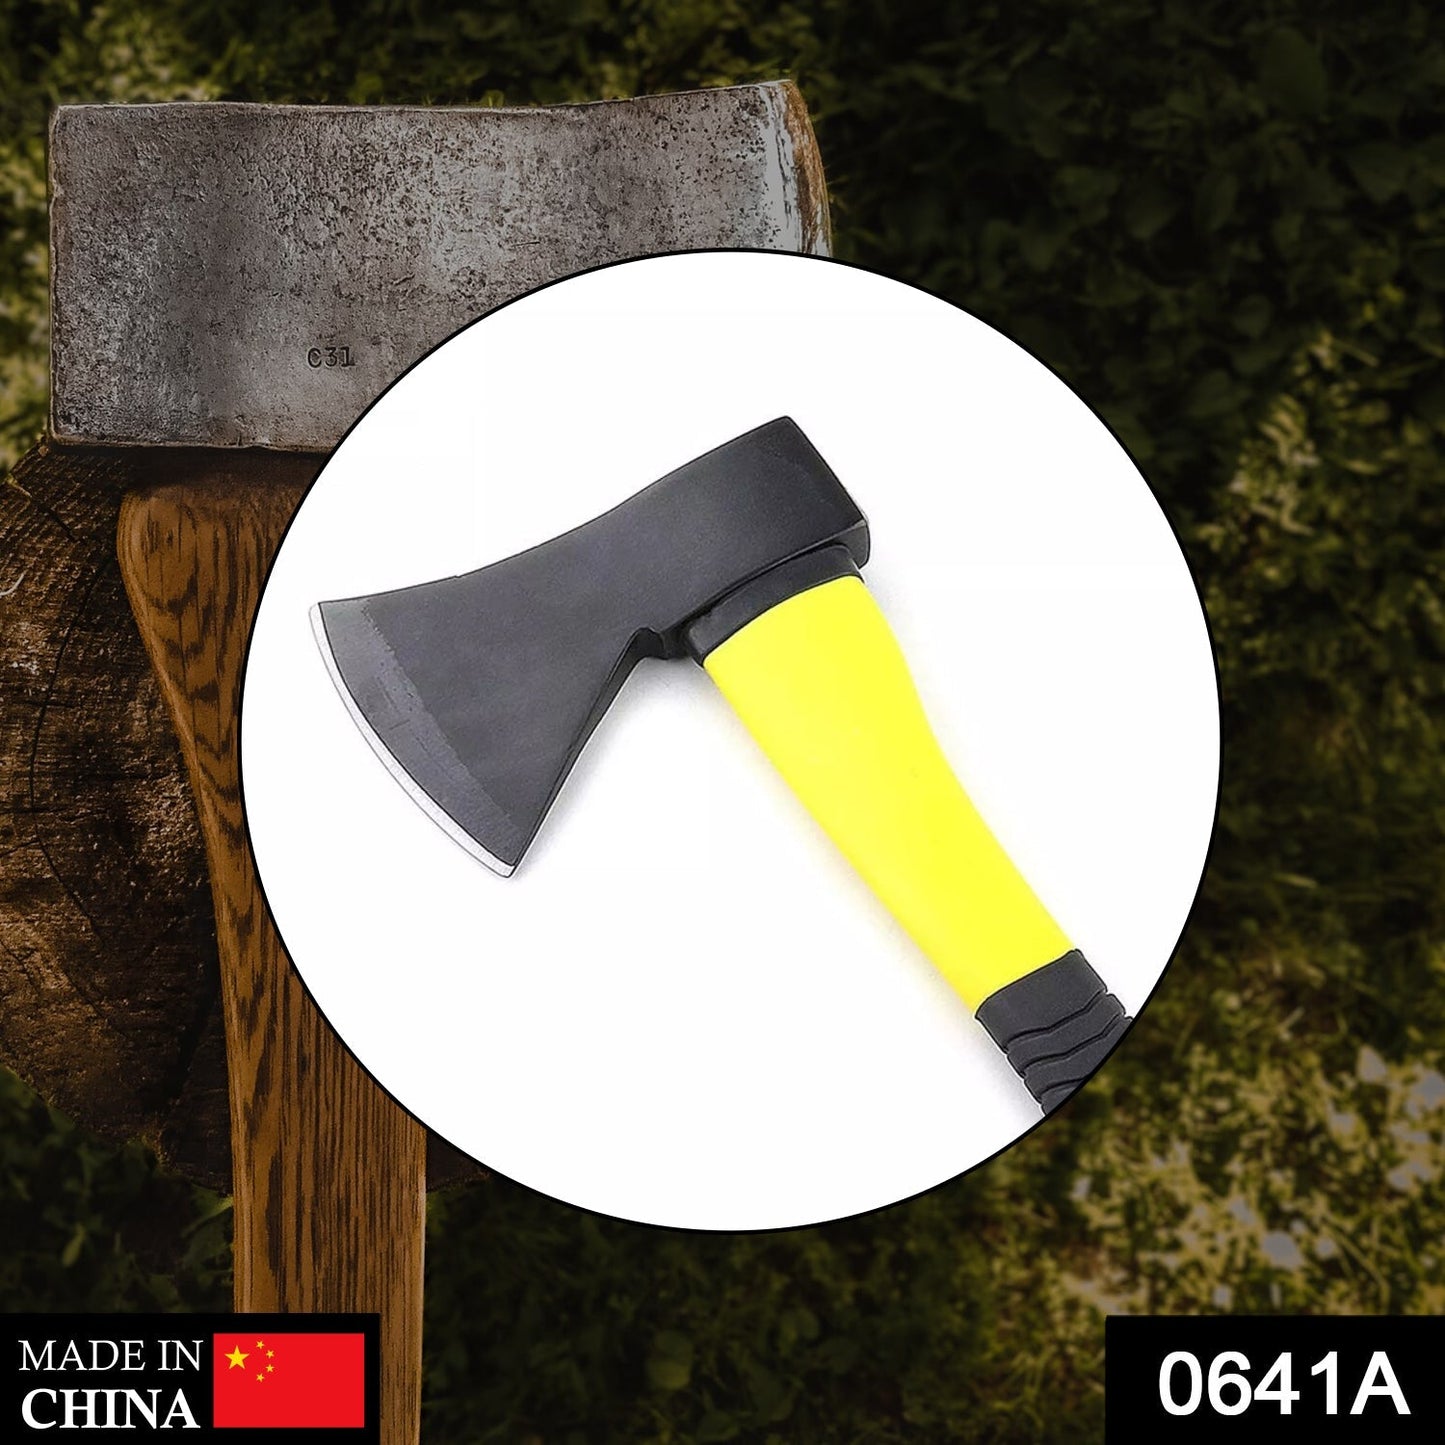 0641A Fiberglas's Body Rubberised Handle Wood Cutting Axe - SWASTIK CREATIONS The Trend Point SWASTIK CREATIONS The Trend Point